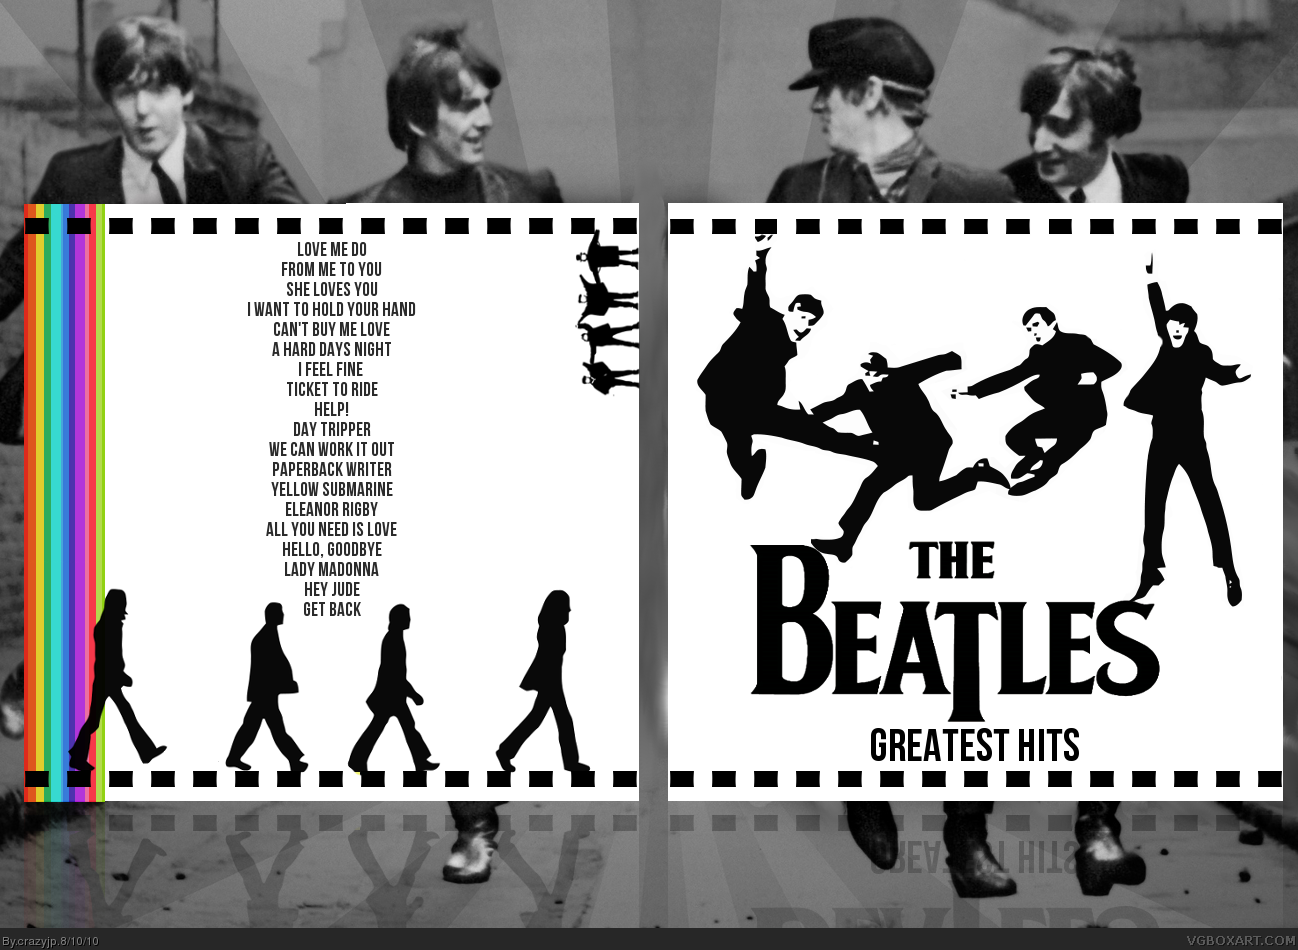 The Beatles: Greatest Hits box cover